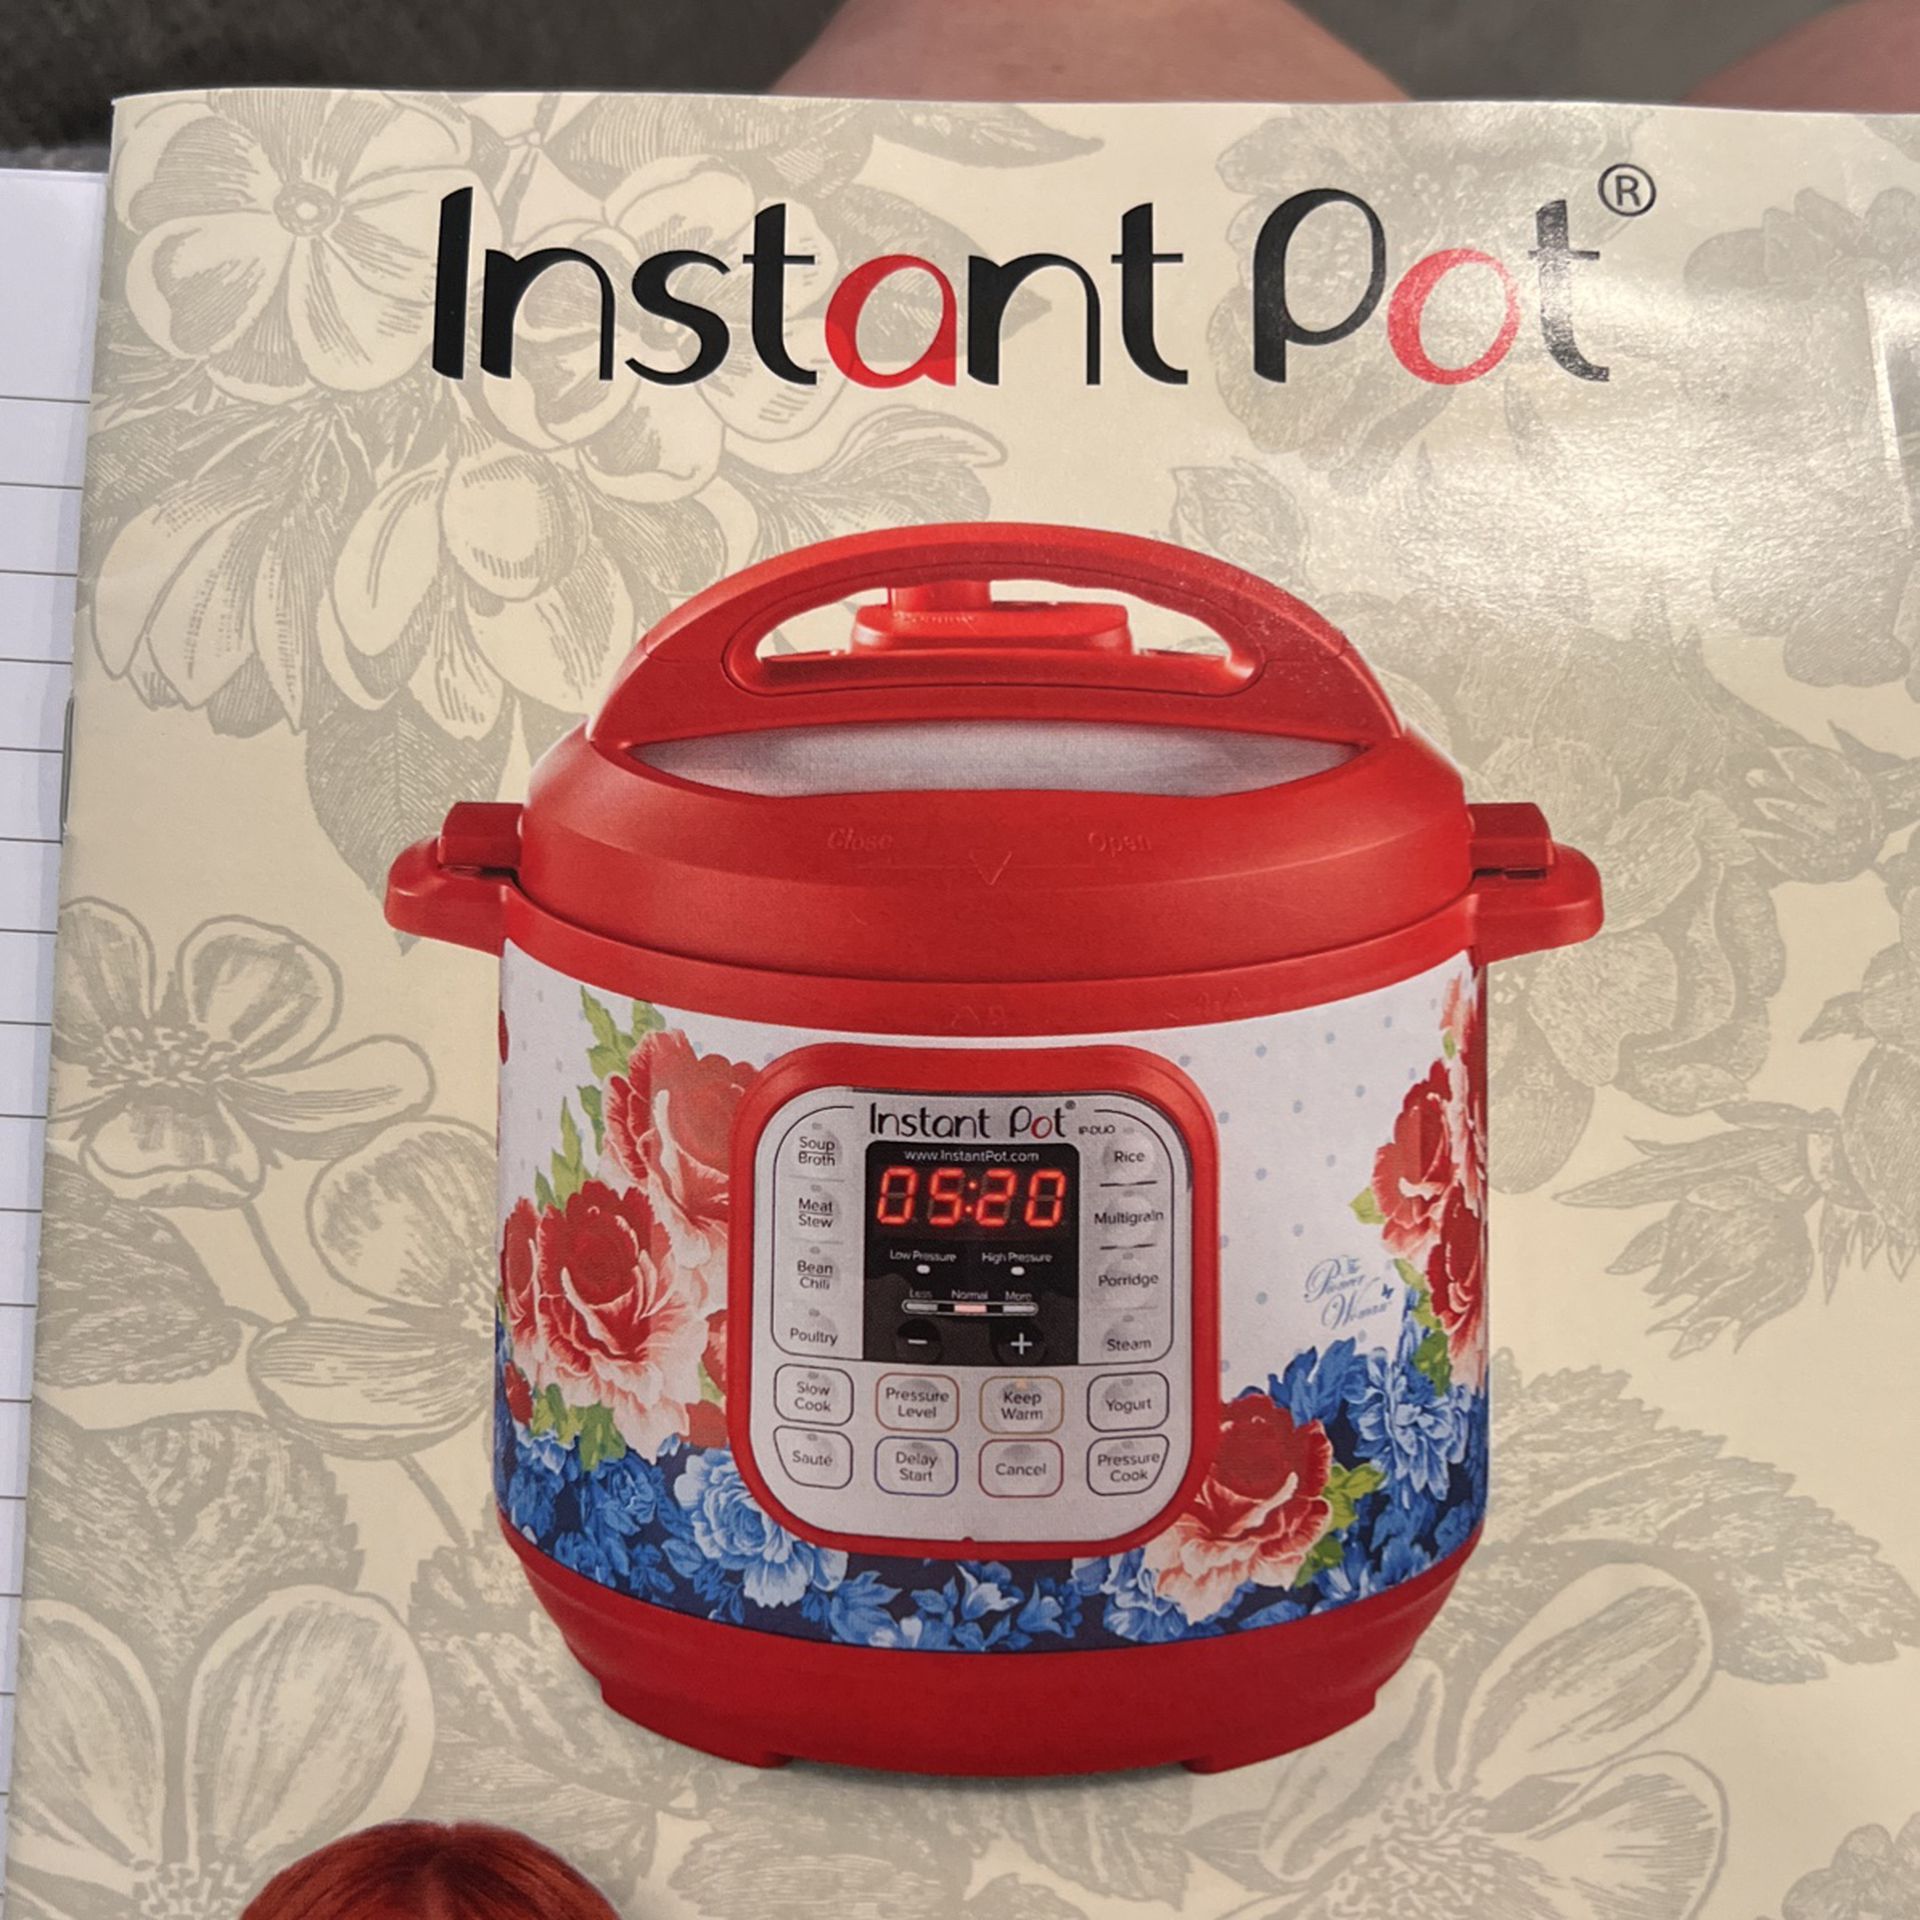 The Pioneer Woman Sweet Rose 6-Quart Instant Pot Duo NEW